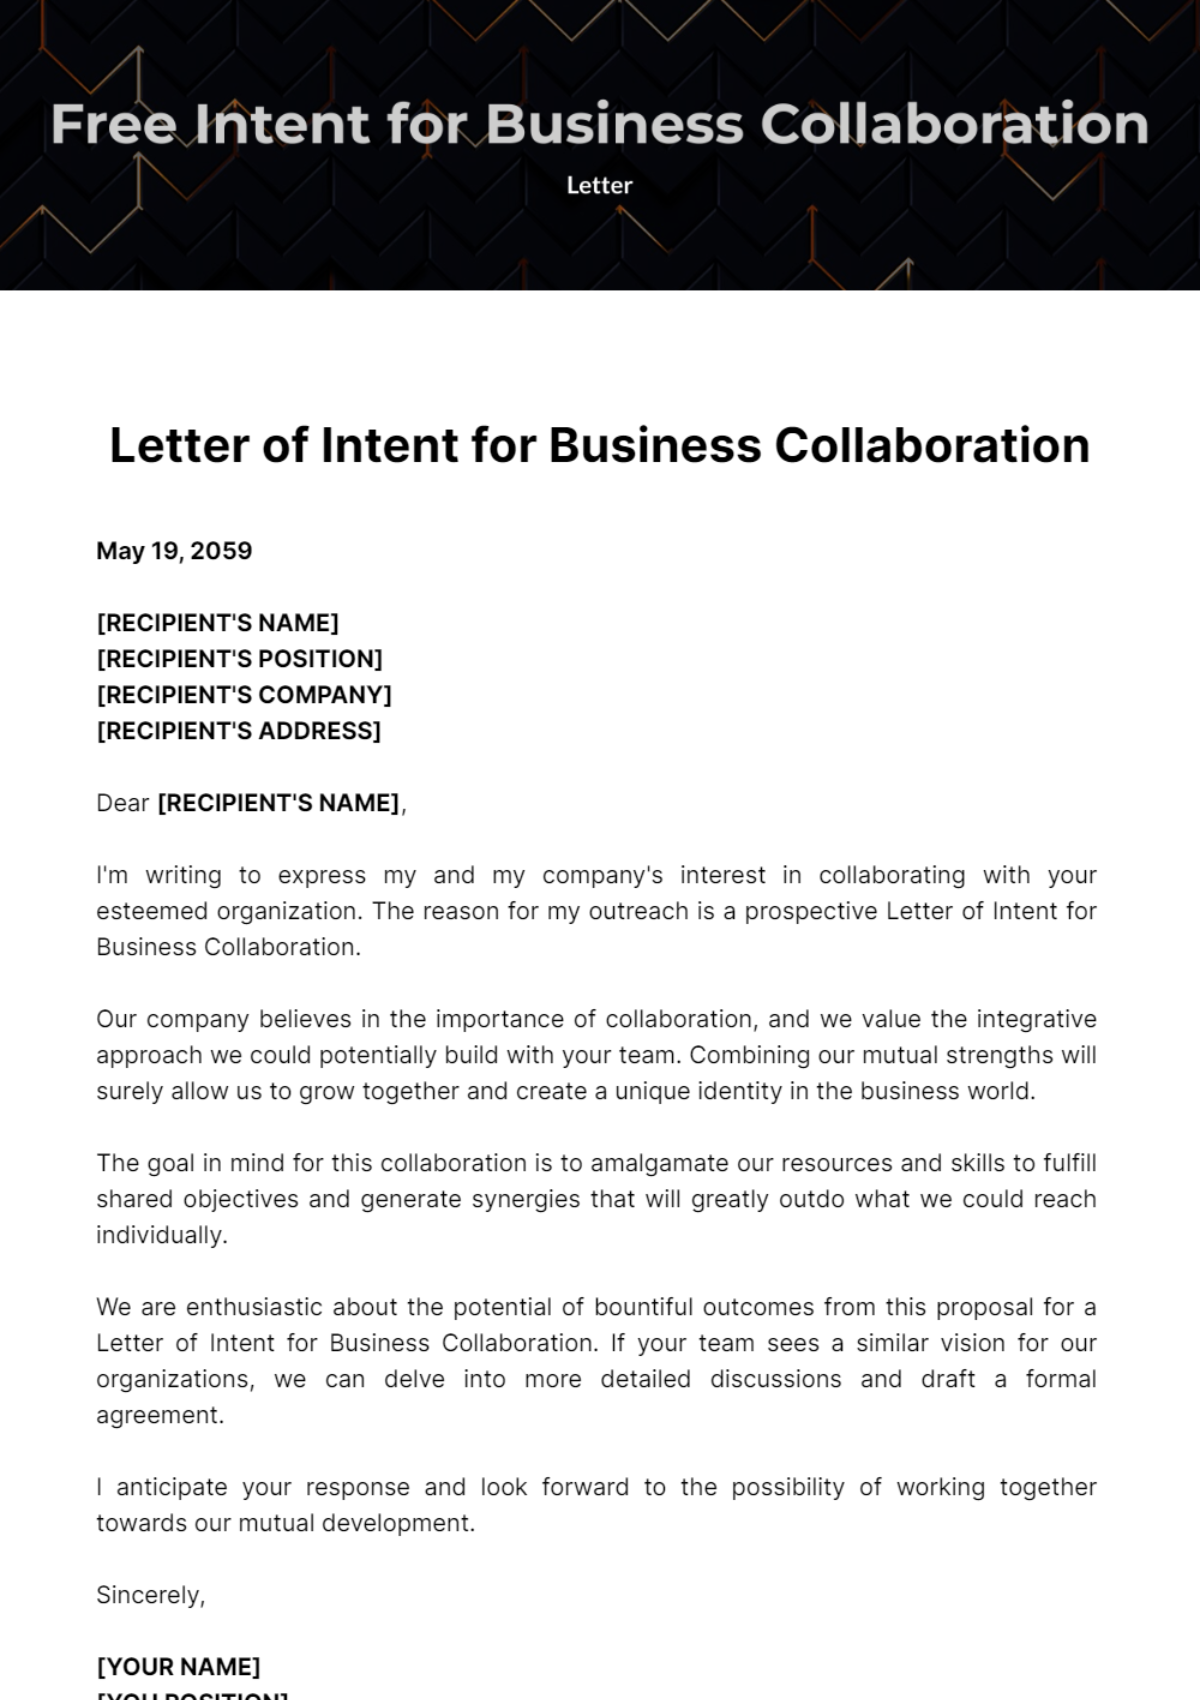 Free Letter of Intent for Business Collaboration Template